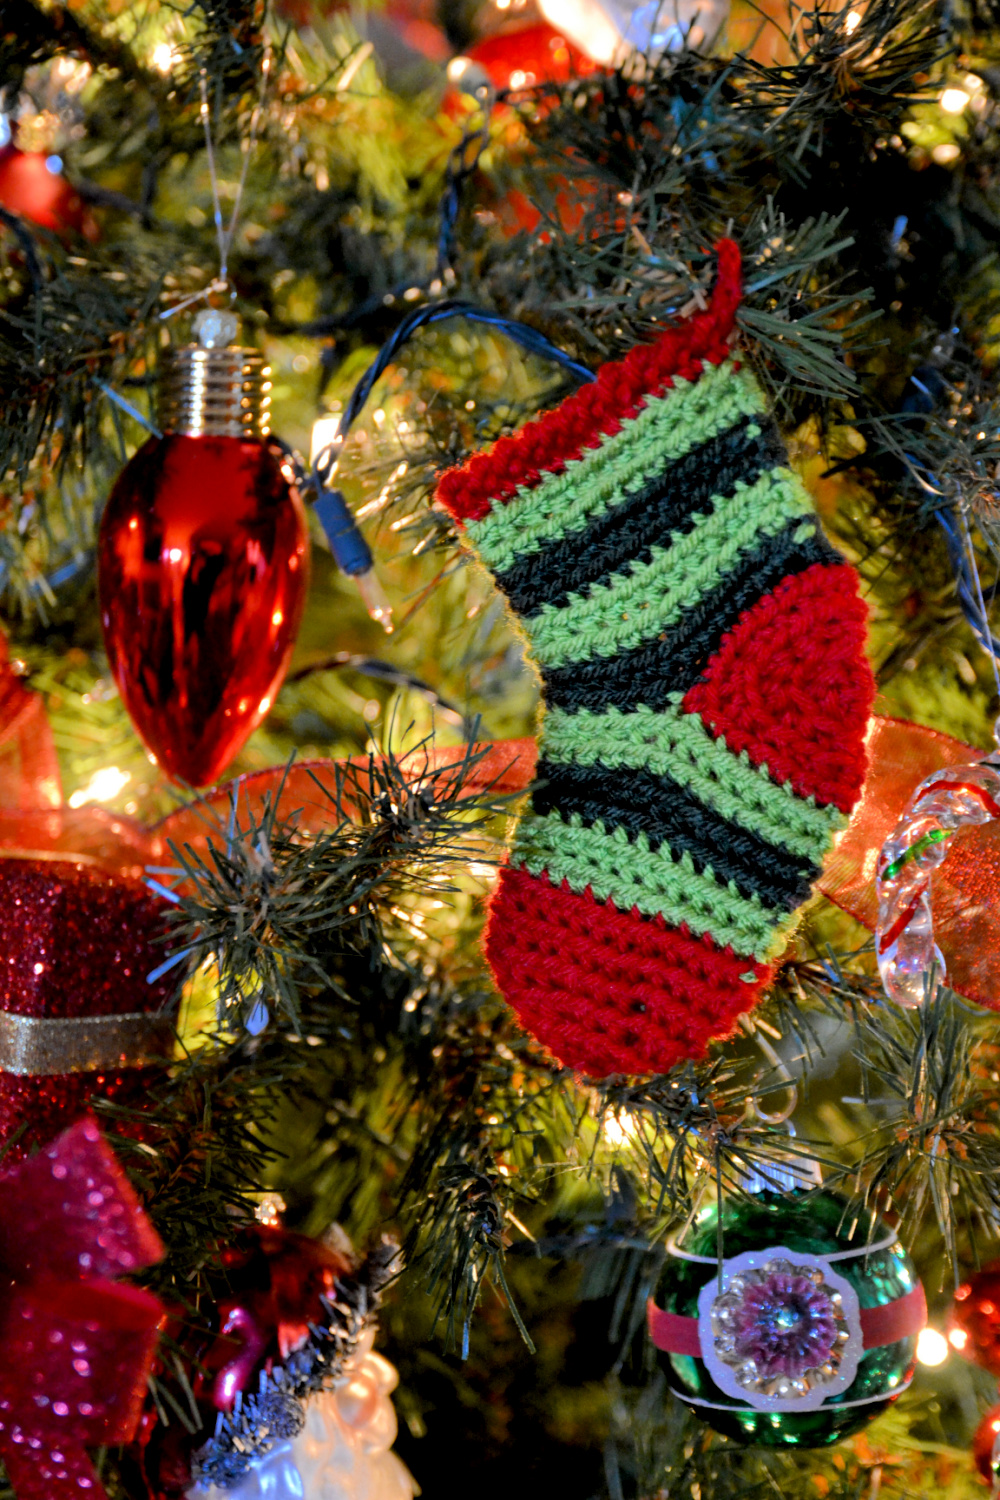 A festive mini crochet Christmas stocking ornament, featuring bold stripes in classic holiday red, green, and black, dangles from a twinkling Christmas tree. The stocking, which exhibits intricate crocheted craftsmanship, is surrounded by an array of traditional decorations including glossy red teardrop baubles, glittery ribbons, and a green ornament with a delicate floral design at its center, all glowing softly amidst the golden fairy lights of the tree. -marly bird